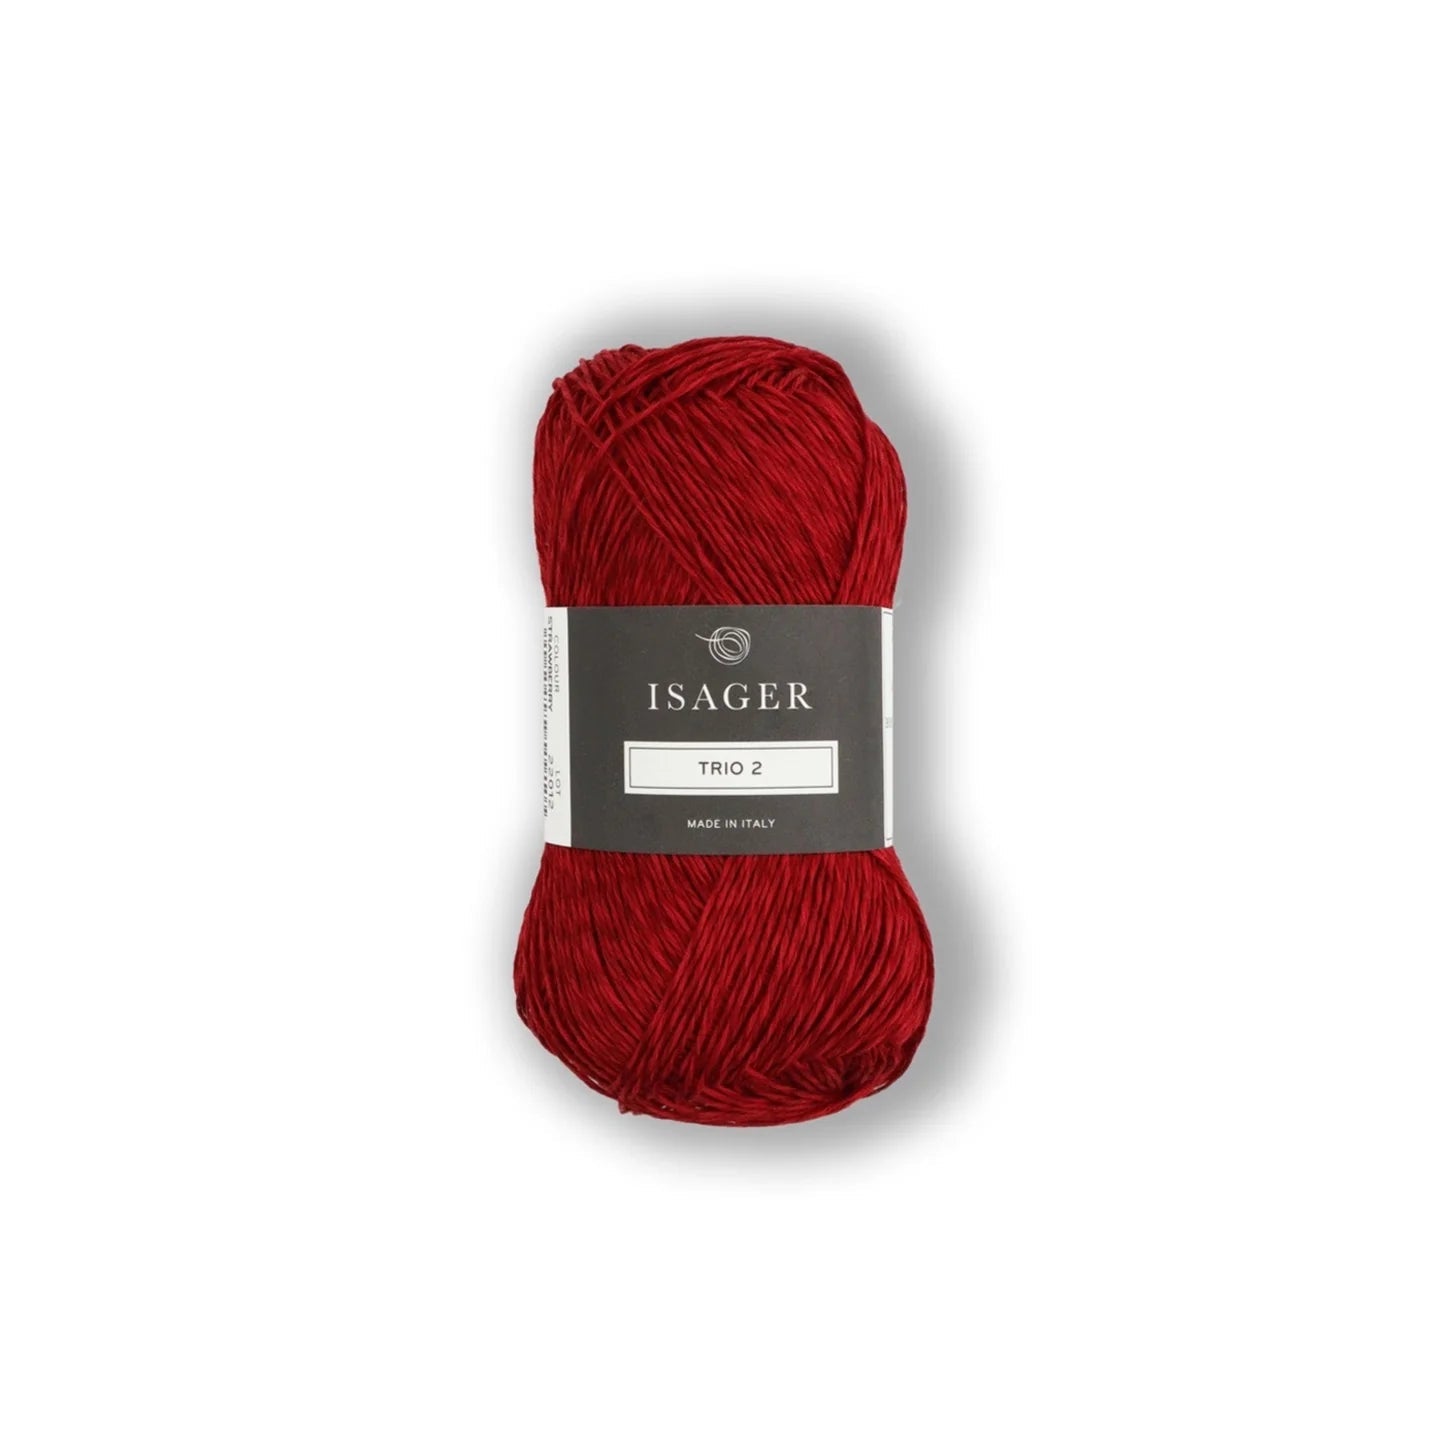 Isager Trio 2 - Strawberry - 5 Ply - Cotton - The Little Yarn Store